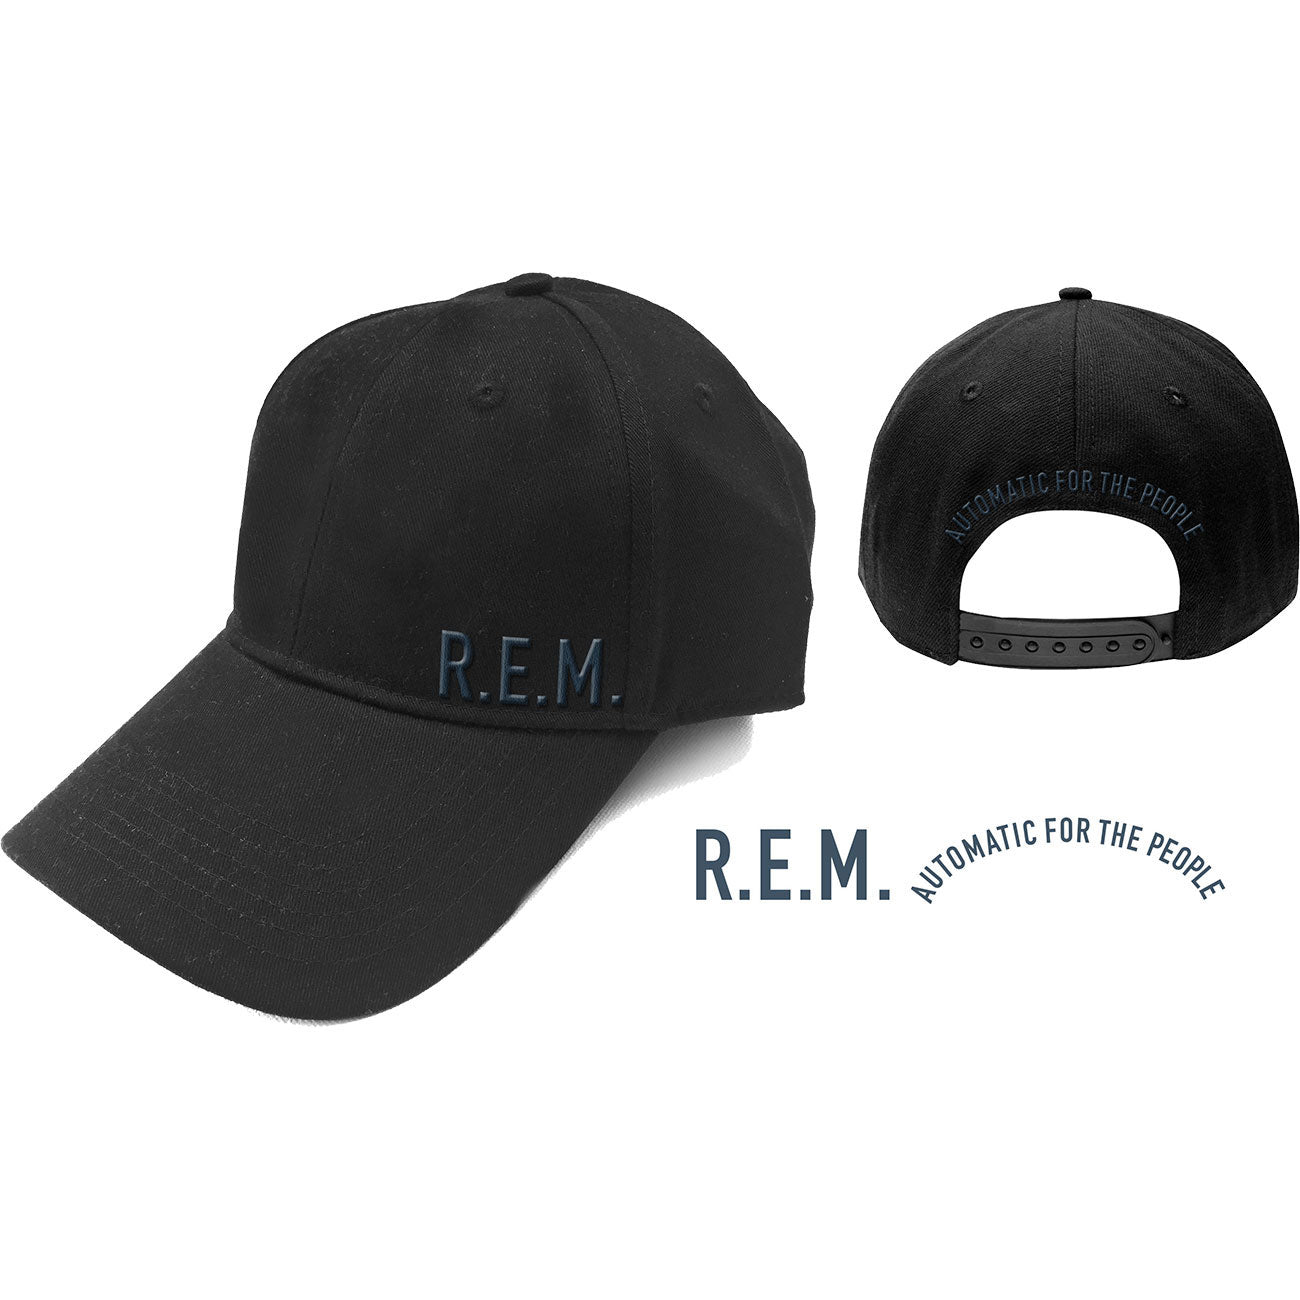 R.E.M. Unisex Baseball Cap: Automatic For The People